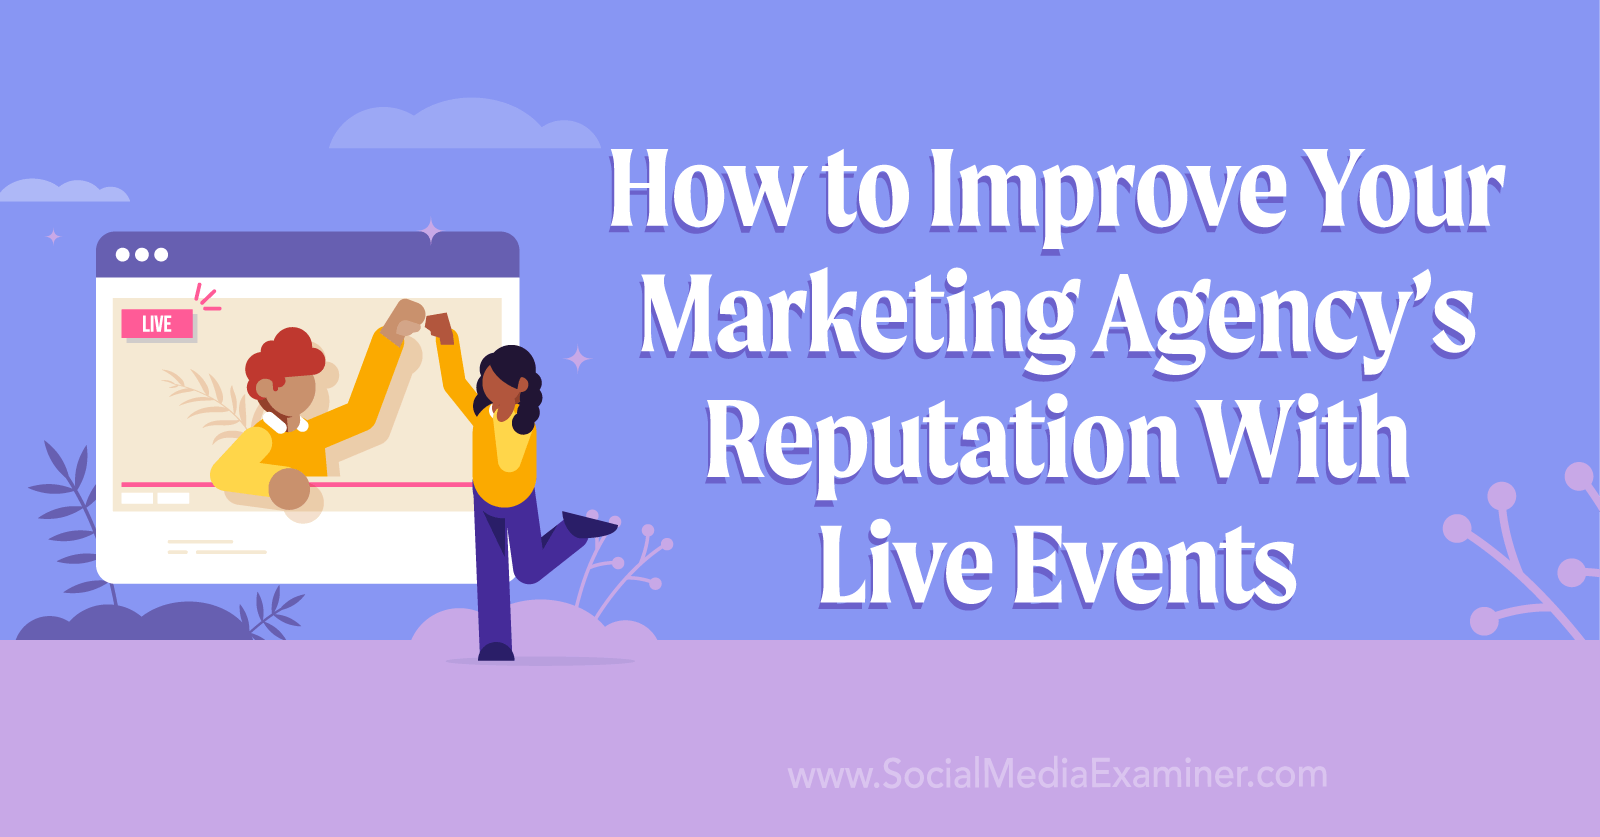 How to Improve Your Marketing Agency's Reputation With Live Events by Social Media Examiner